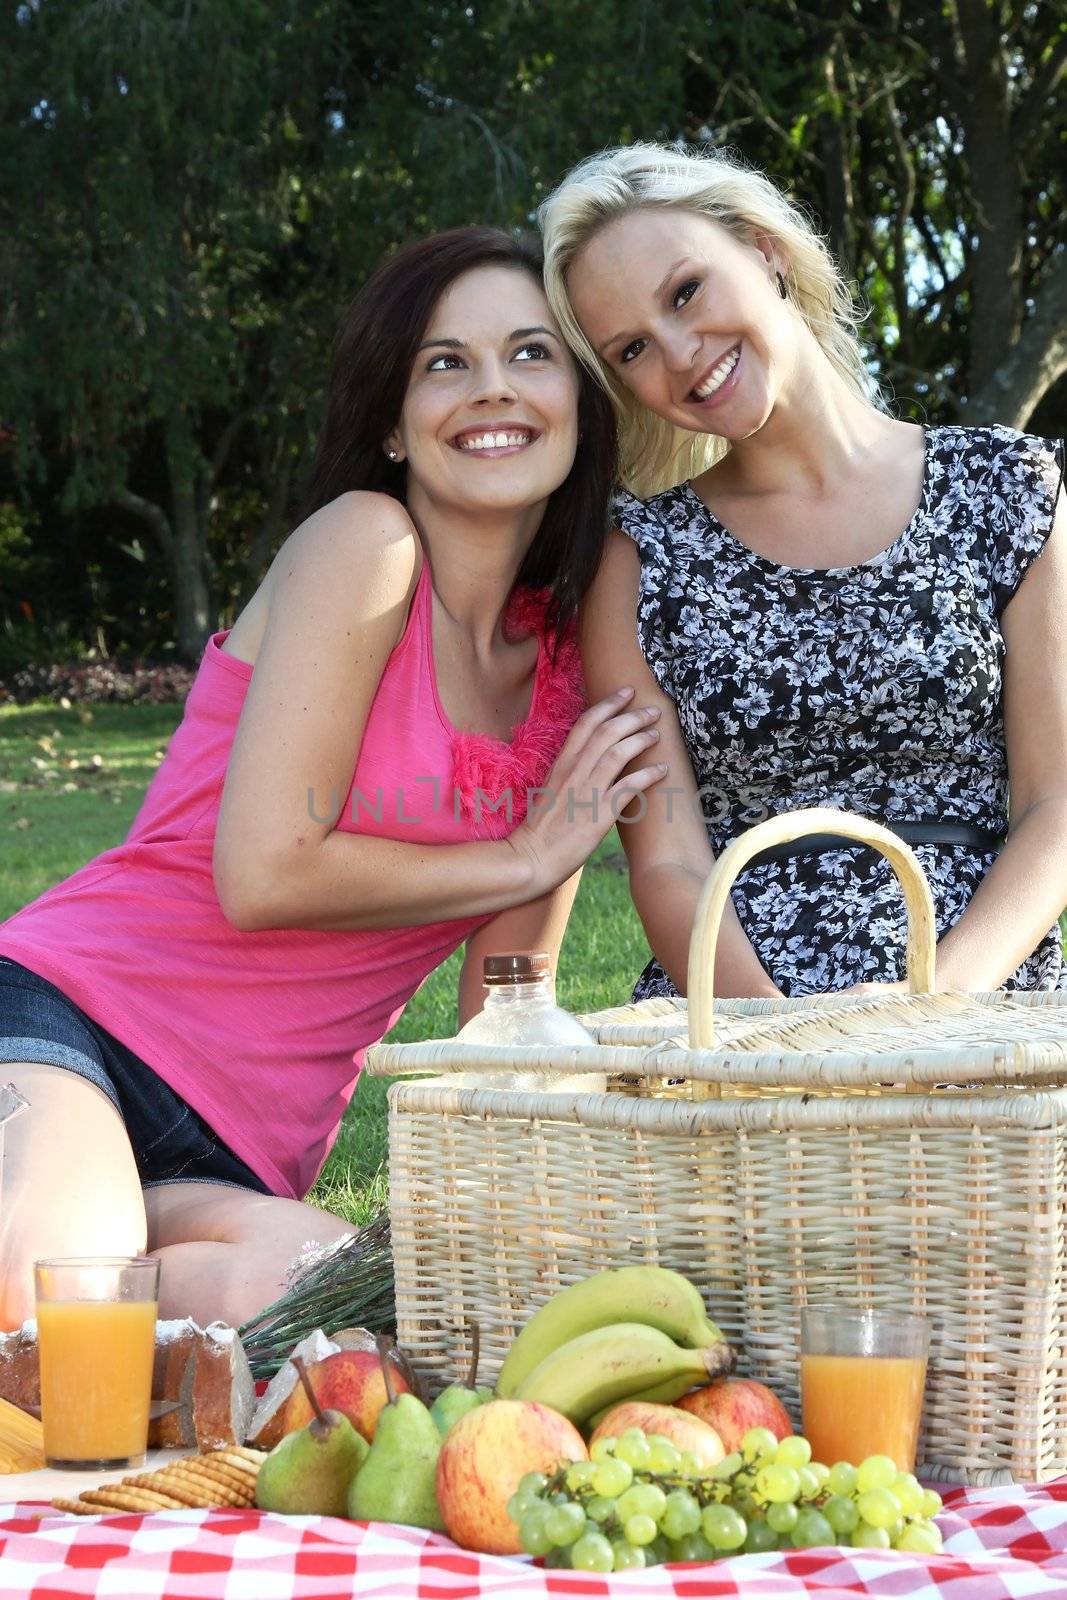 Two beautiful young lady friends enjoying a picnic together on a green lawn